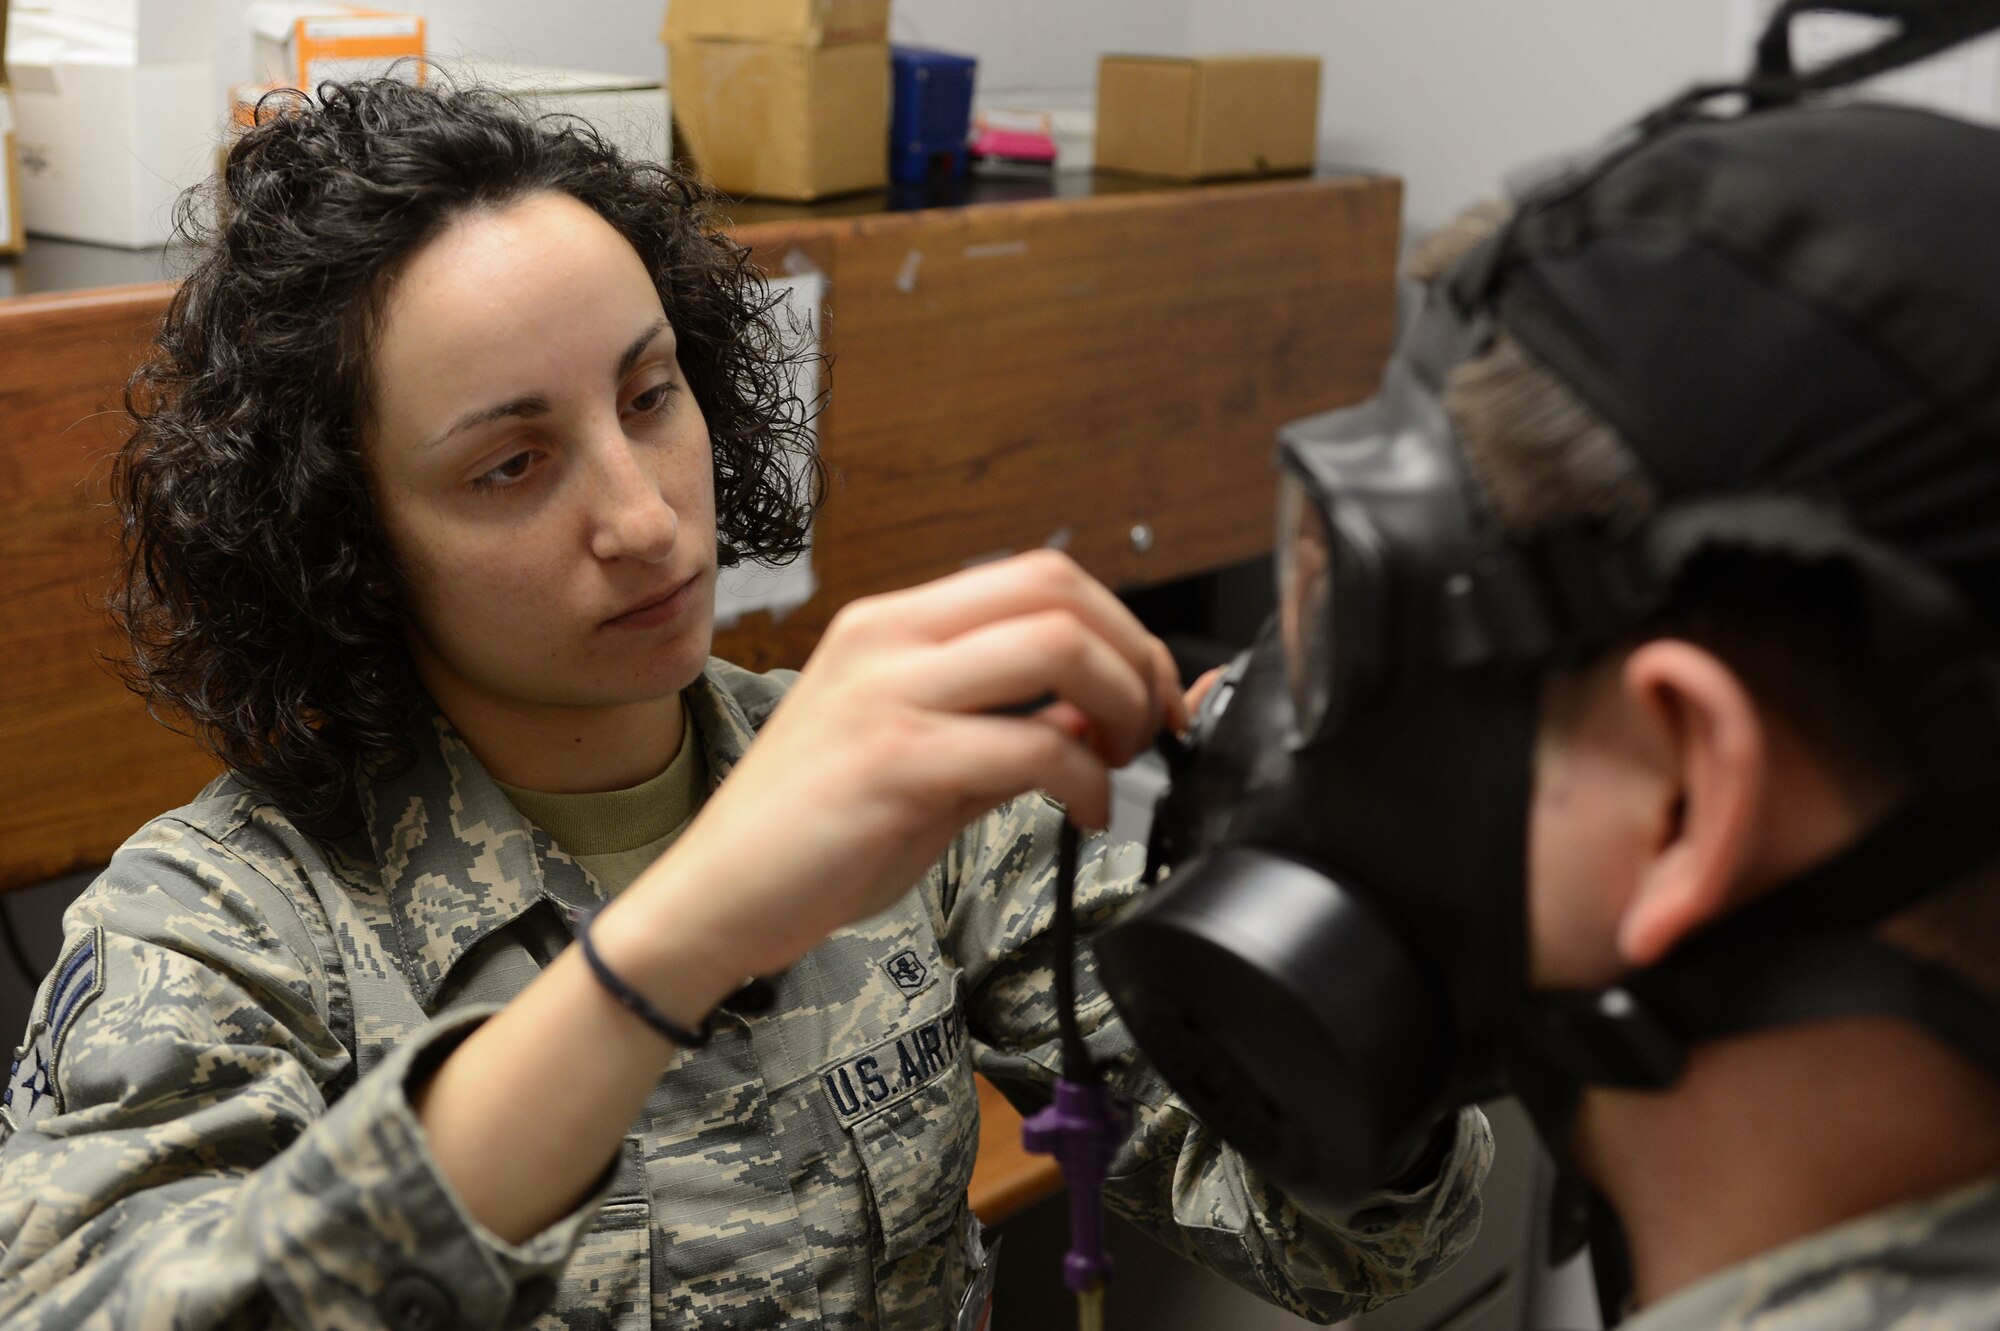 U.S. Air Force Airman 1st Class Carola Anselmi, 20th Aerospace Medicine Squadron bioenvironmental journeyman, conducts a gas mask fit test at Shaw Air Force Base, S.C., Jan. 21, 2016. Airmen from the 20th AMDS bioenvironmental flight conduct gas mask fit tests to ensure all gas masks issued to Team Shaw personnel fit properly and are in good working order. (U.S. Air Force photo by Senior Airman Zade Vadnais)